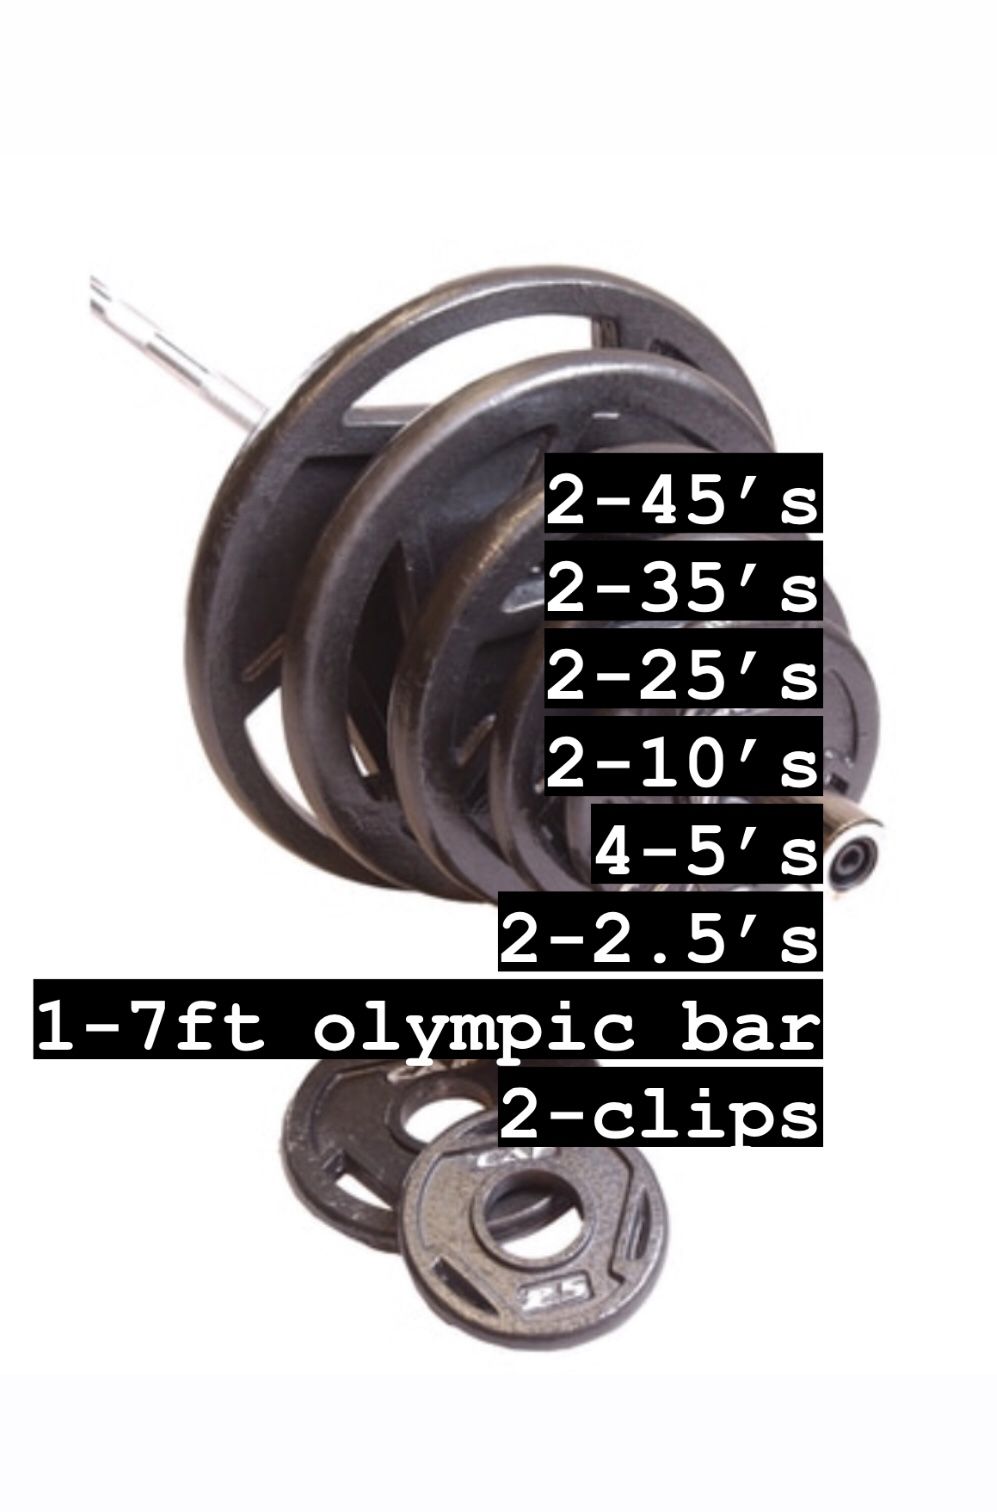 300LB OLYMPIC SET WITH GRIP PLATES, BAR, & CLIPS